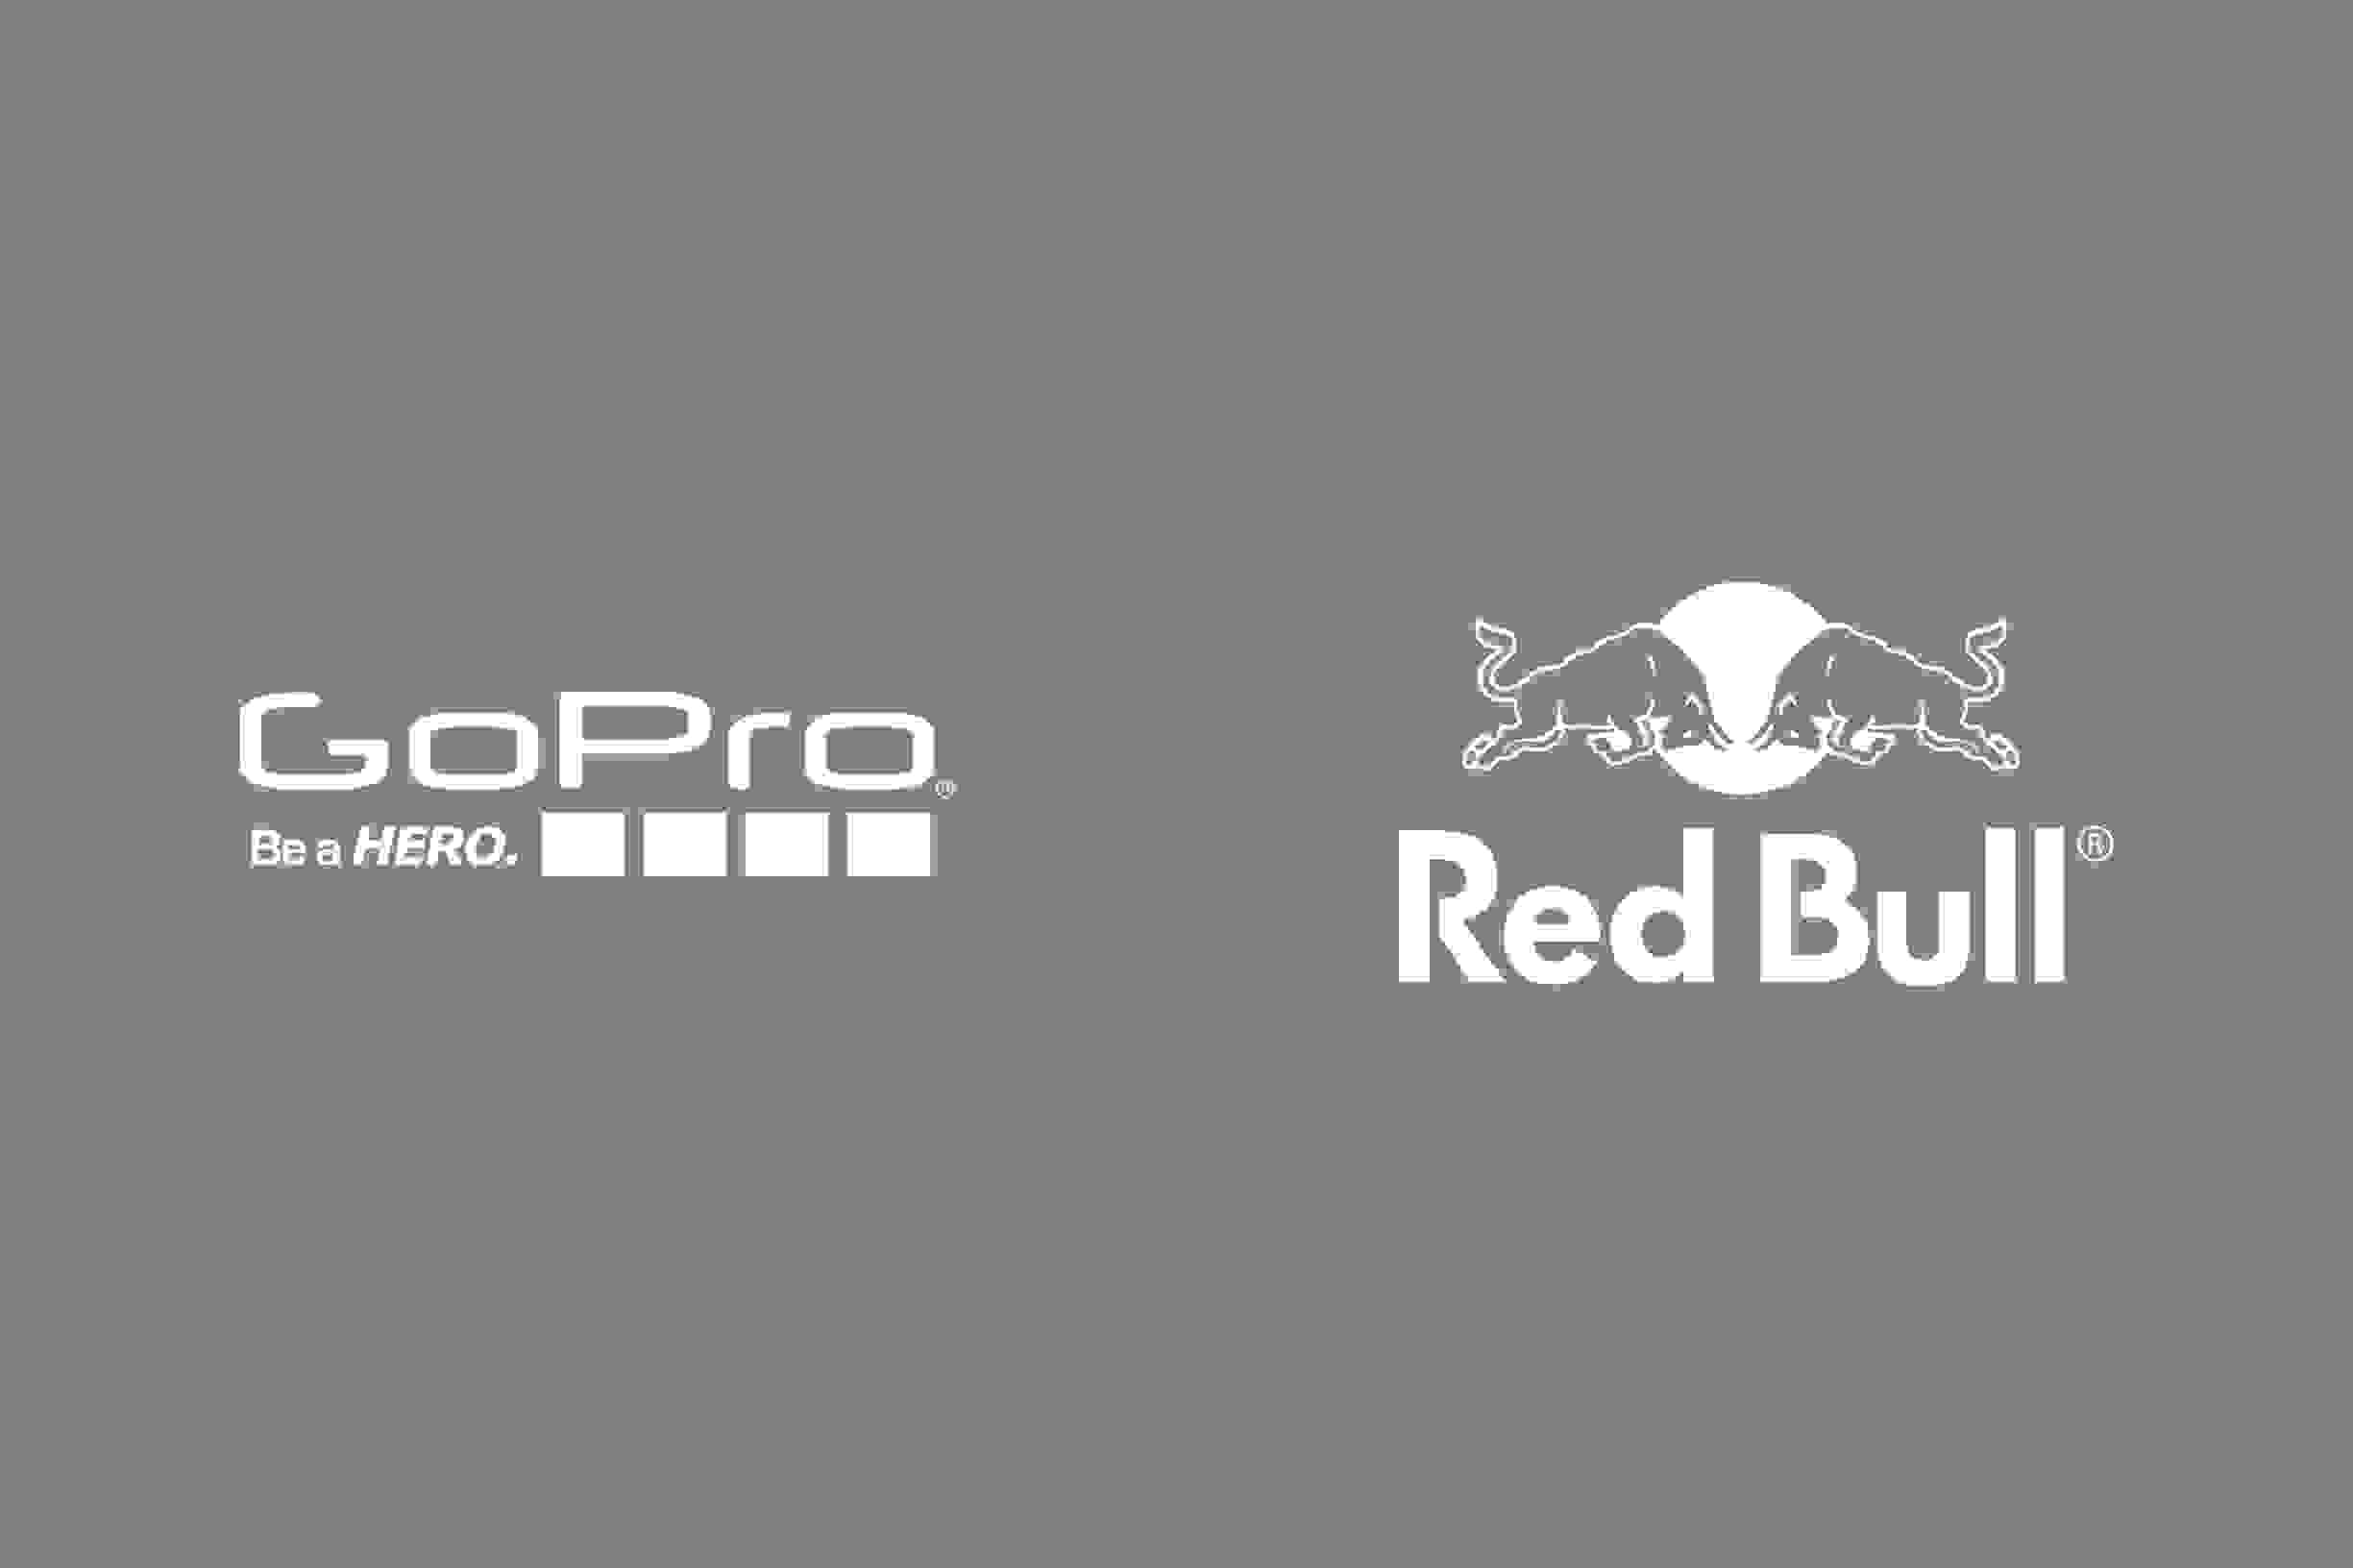 Go Pro and Red Bull logo side by side